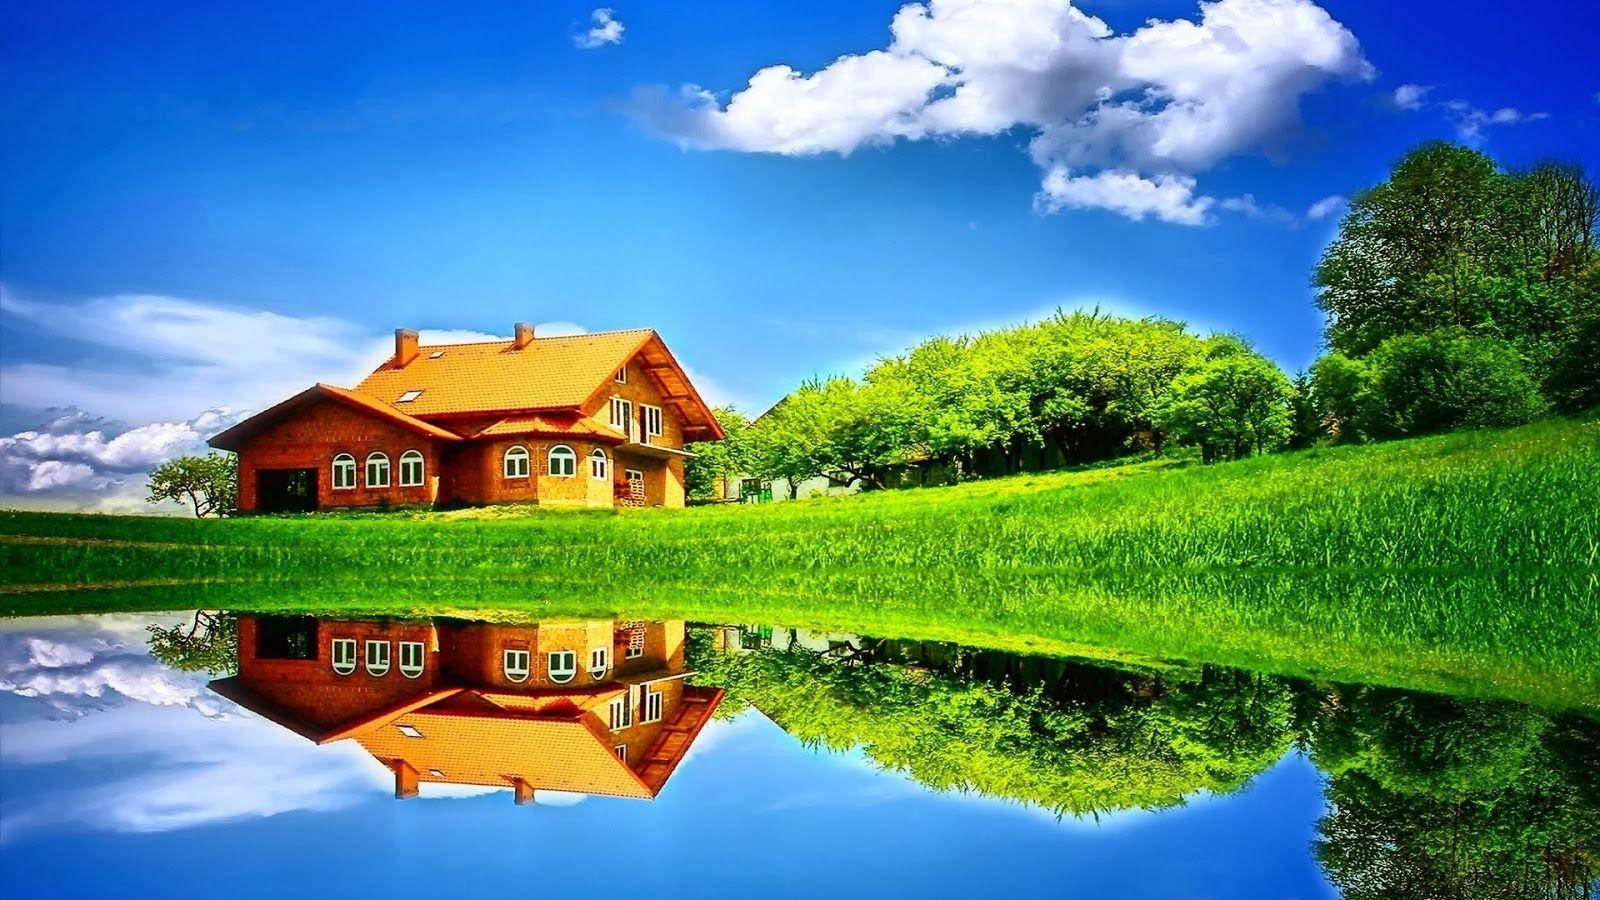 1080p Hd Cottage By The Lake Background